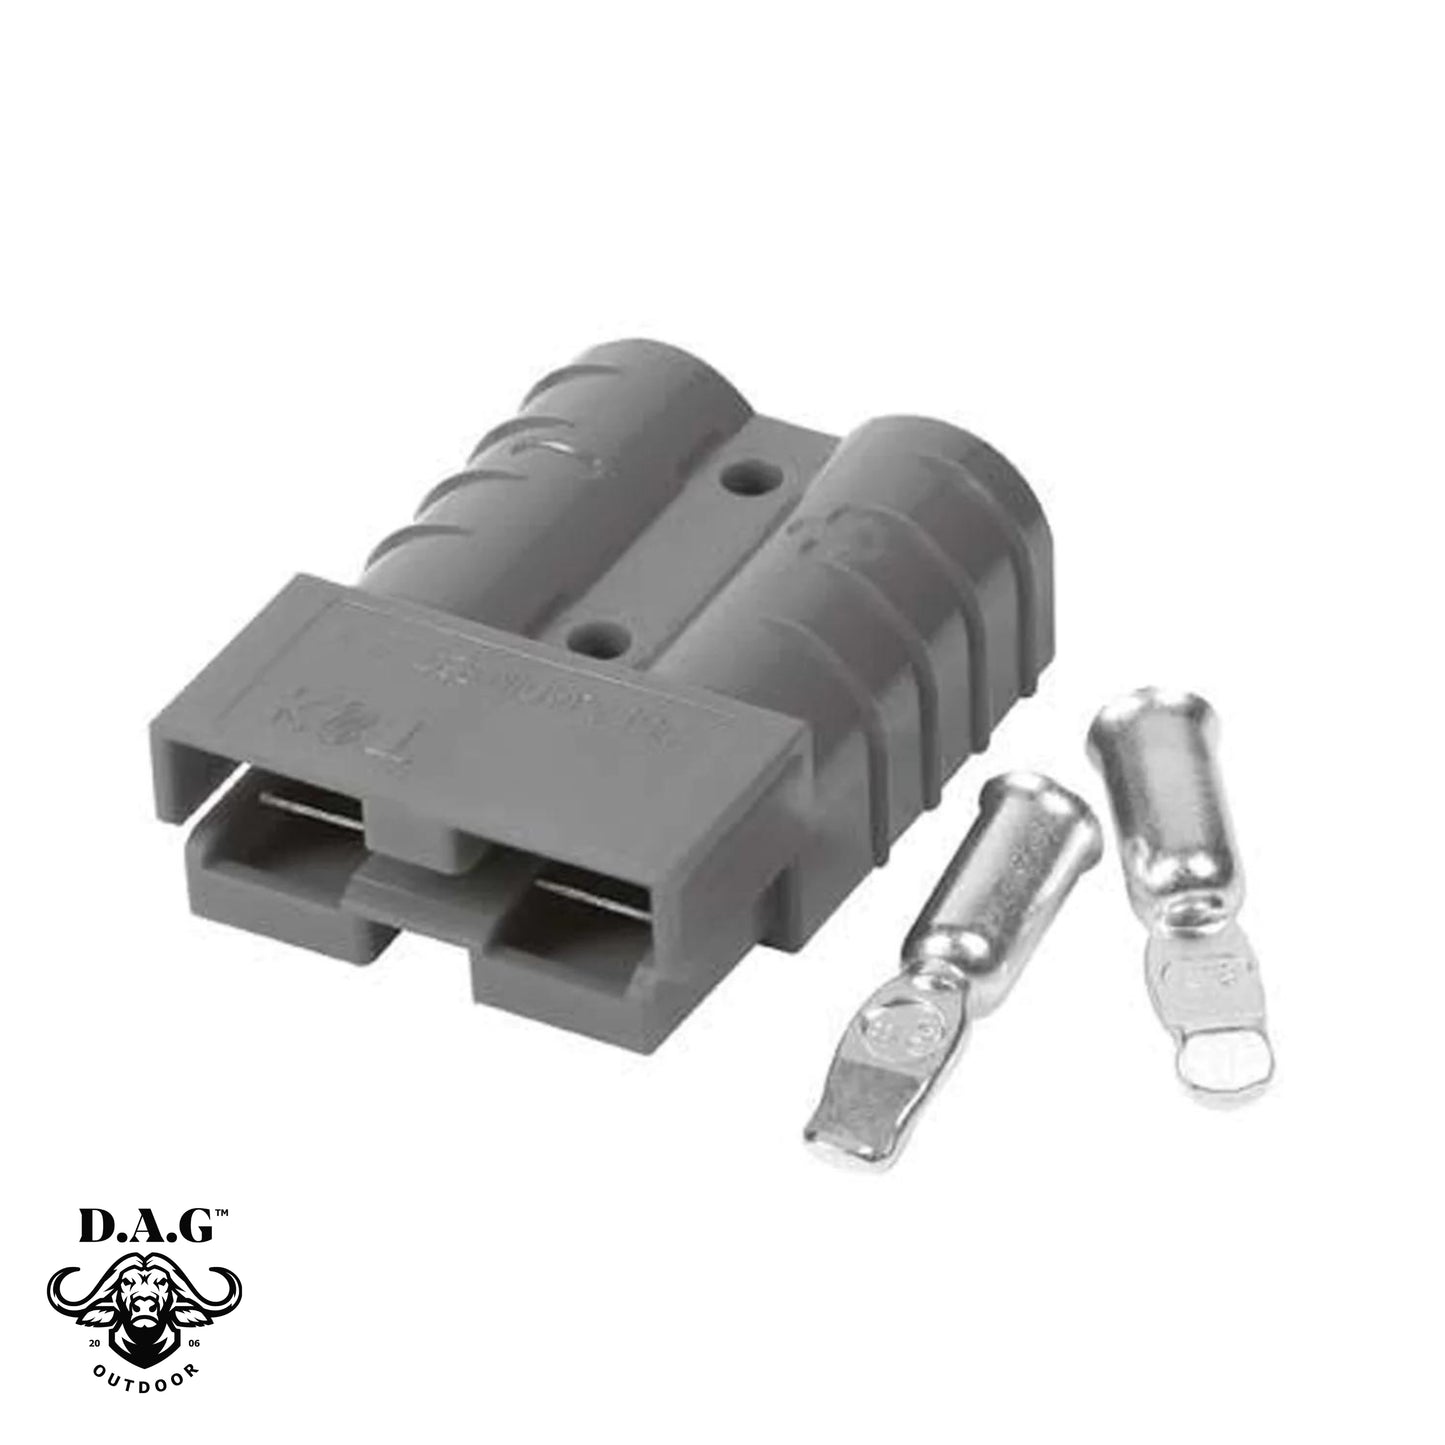 D.A.G | Brad Harrison 175 AMP Wire size (AWG) Plug fitting